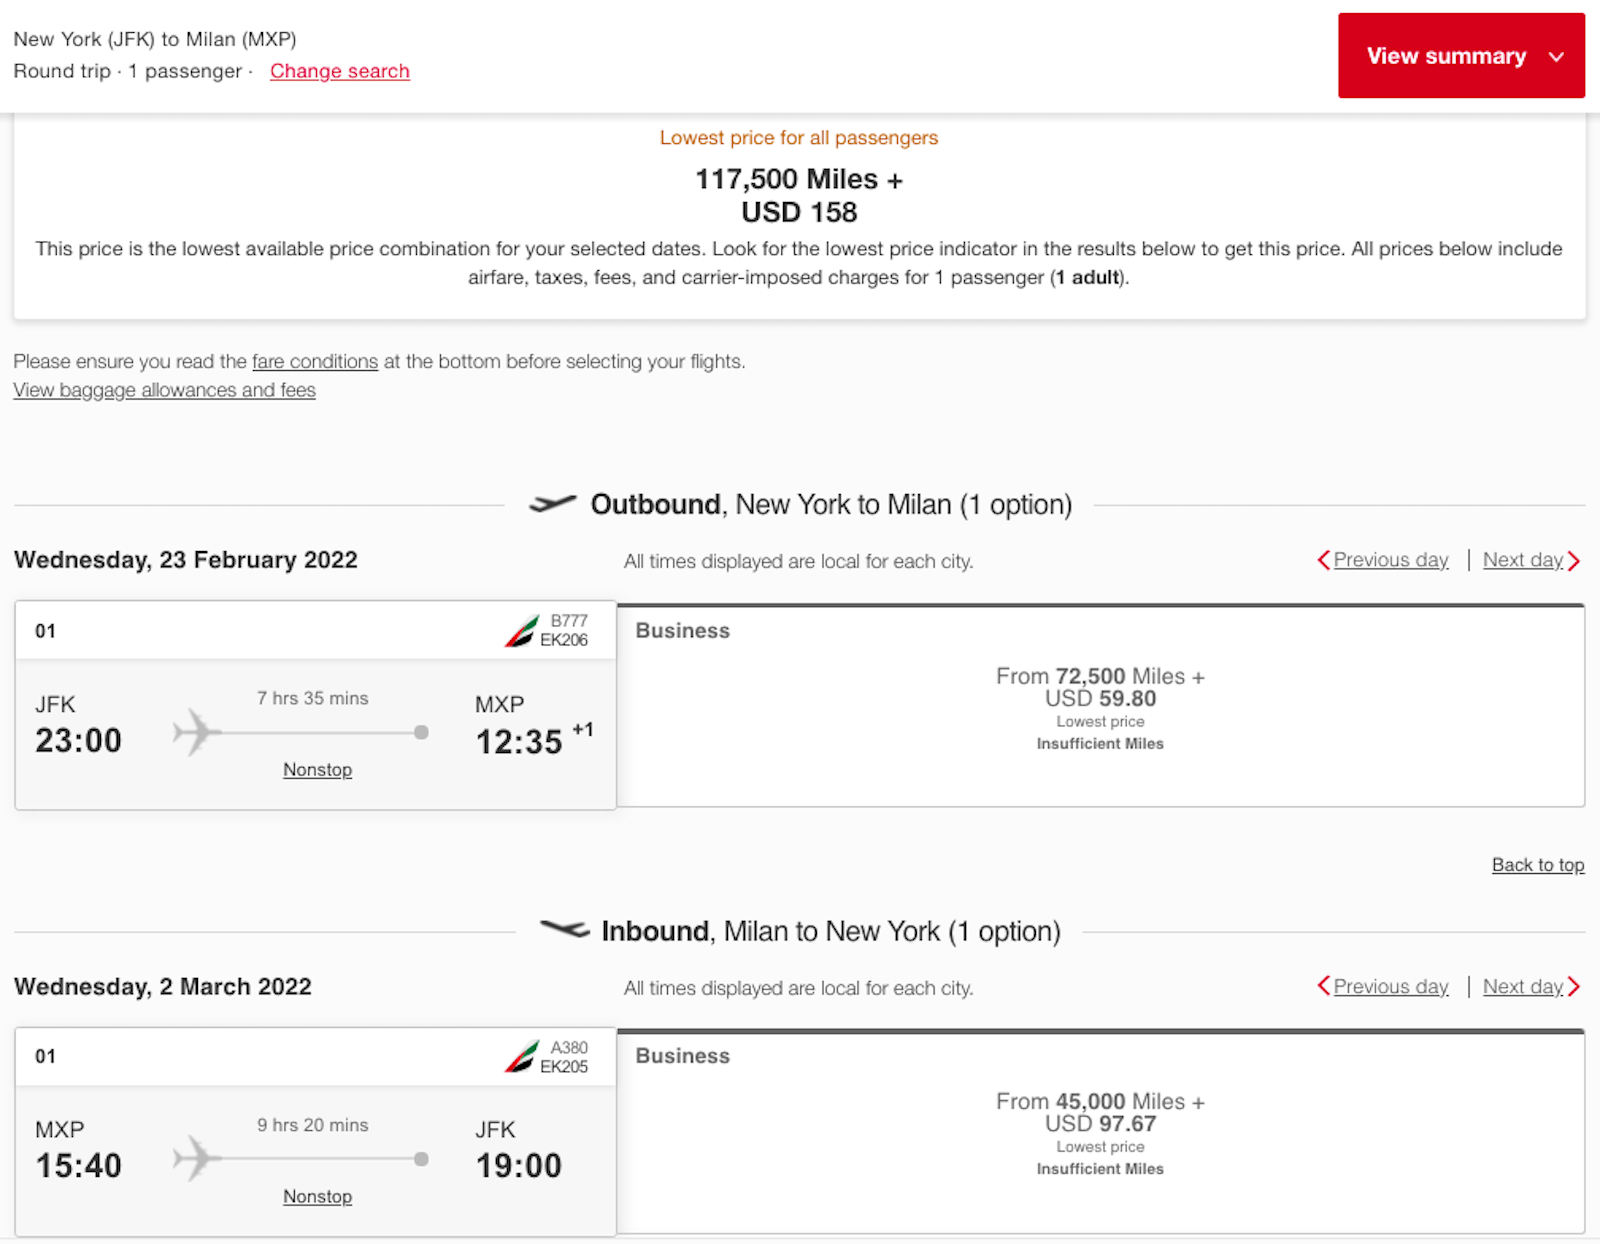 Sample Emirates business class itinerary JFK-MXP round-trip showing no devaluation